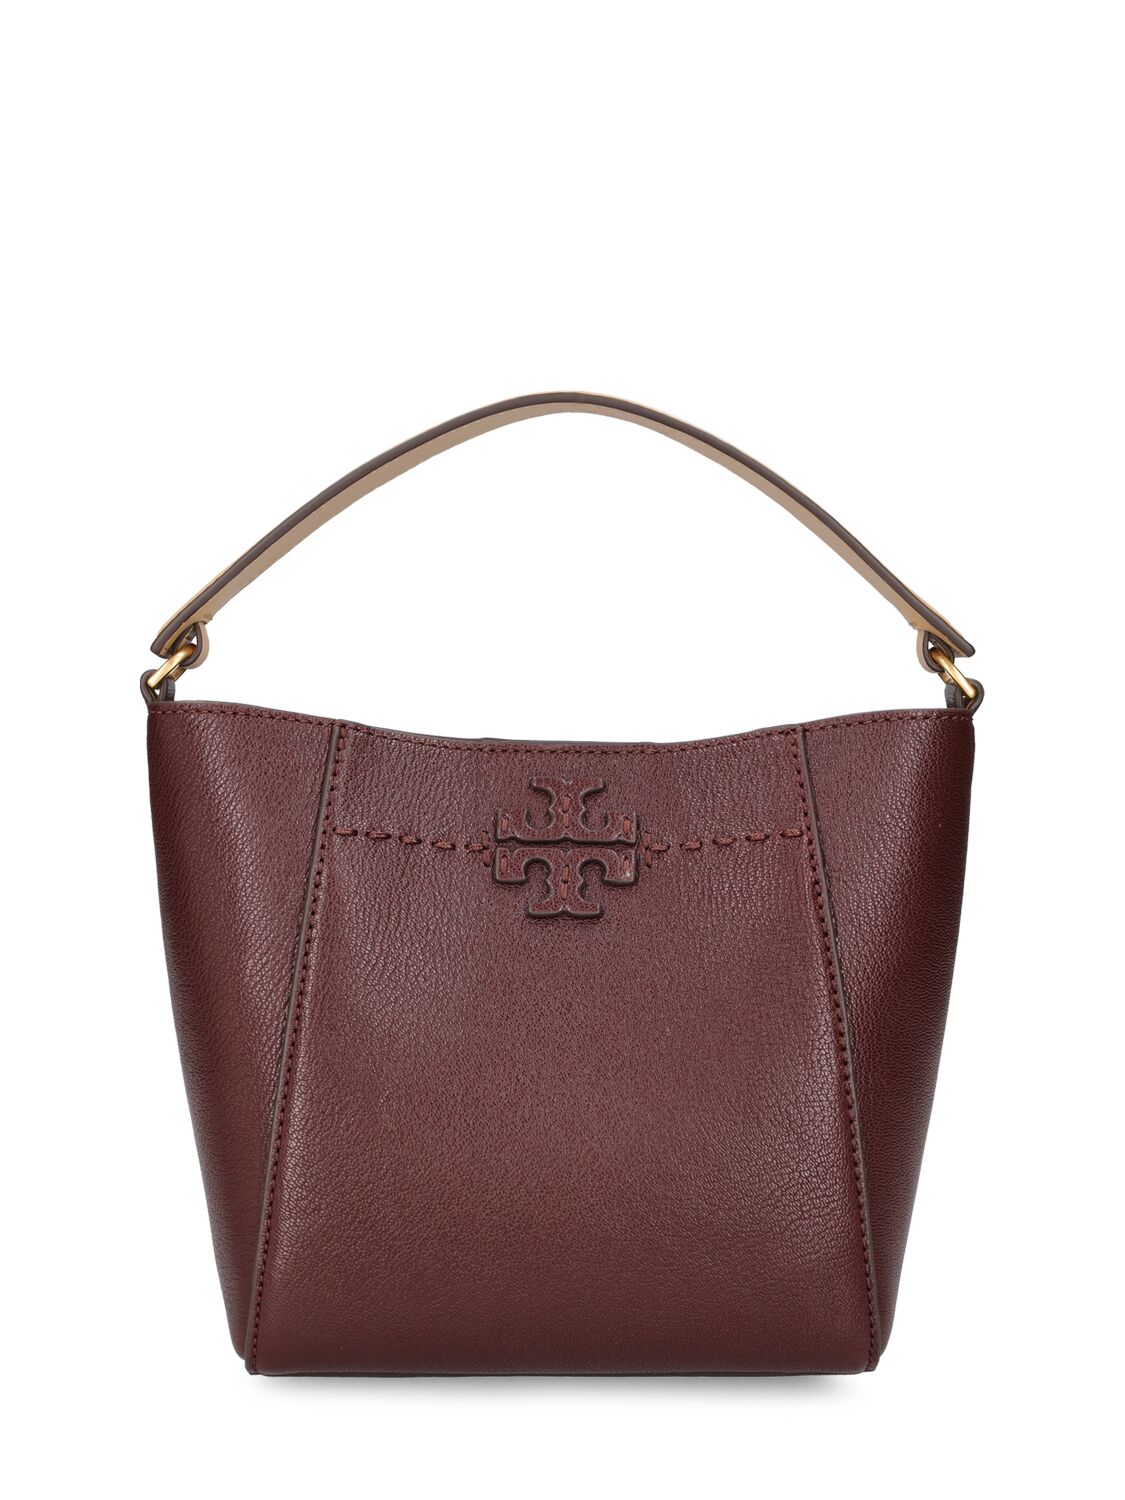 Tory Burch Small Mcgraw Textured Bucket Bag In Bordeaux